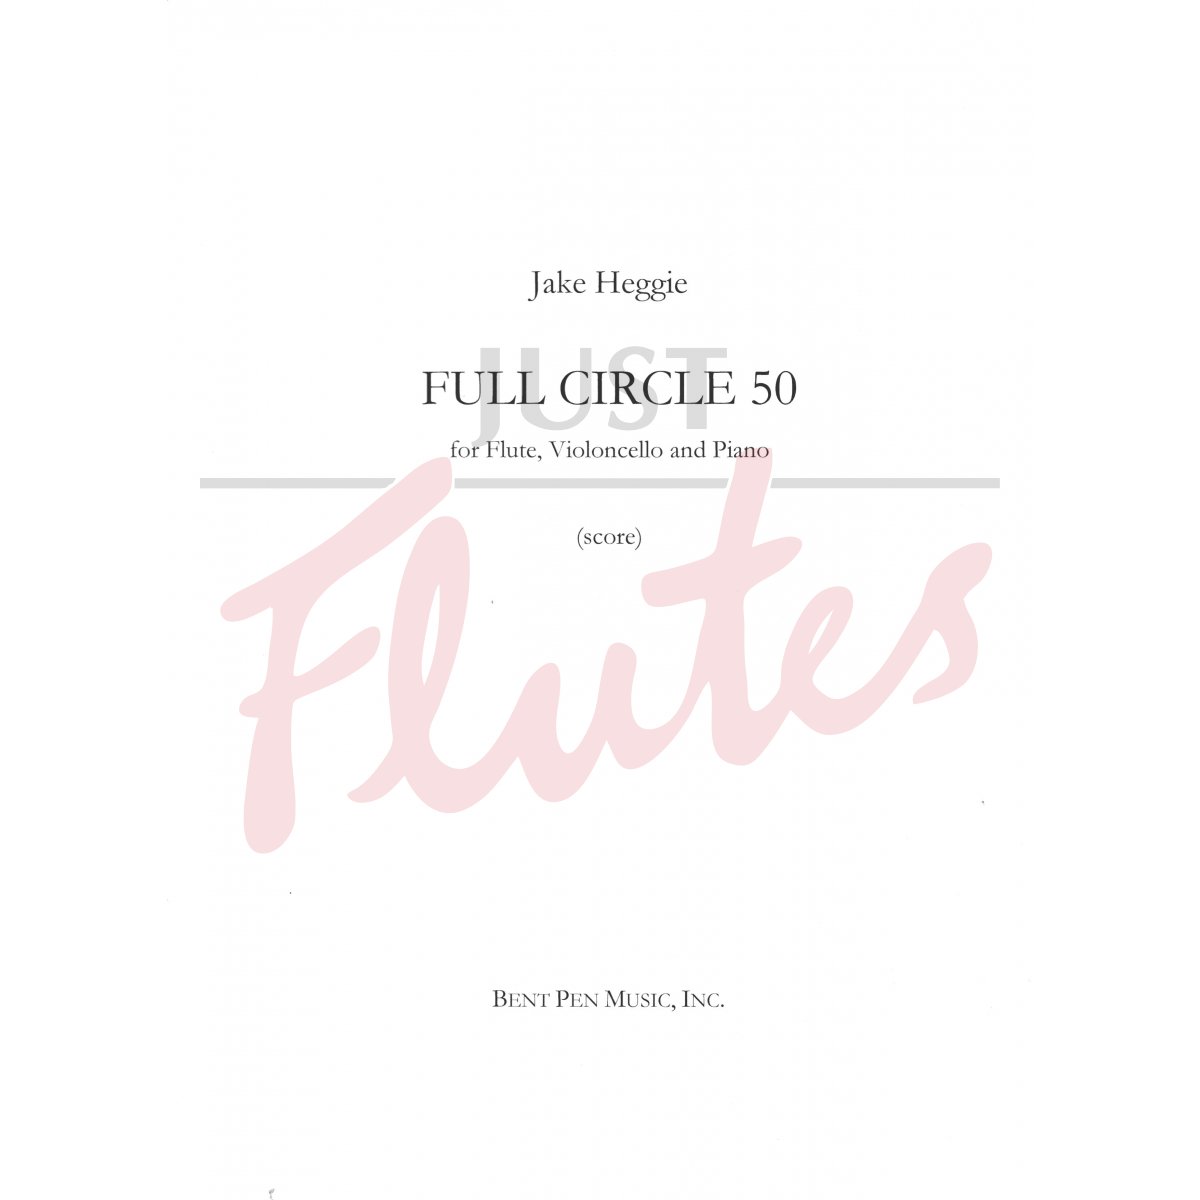 Full Circle 50 for Flute, Cello and Piano